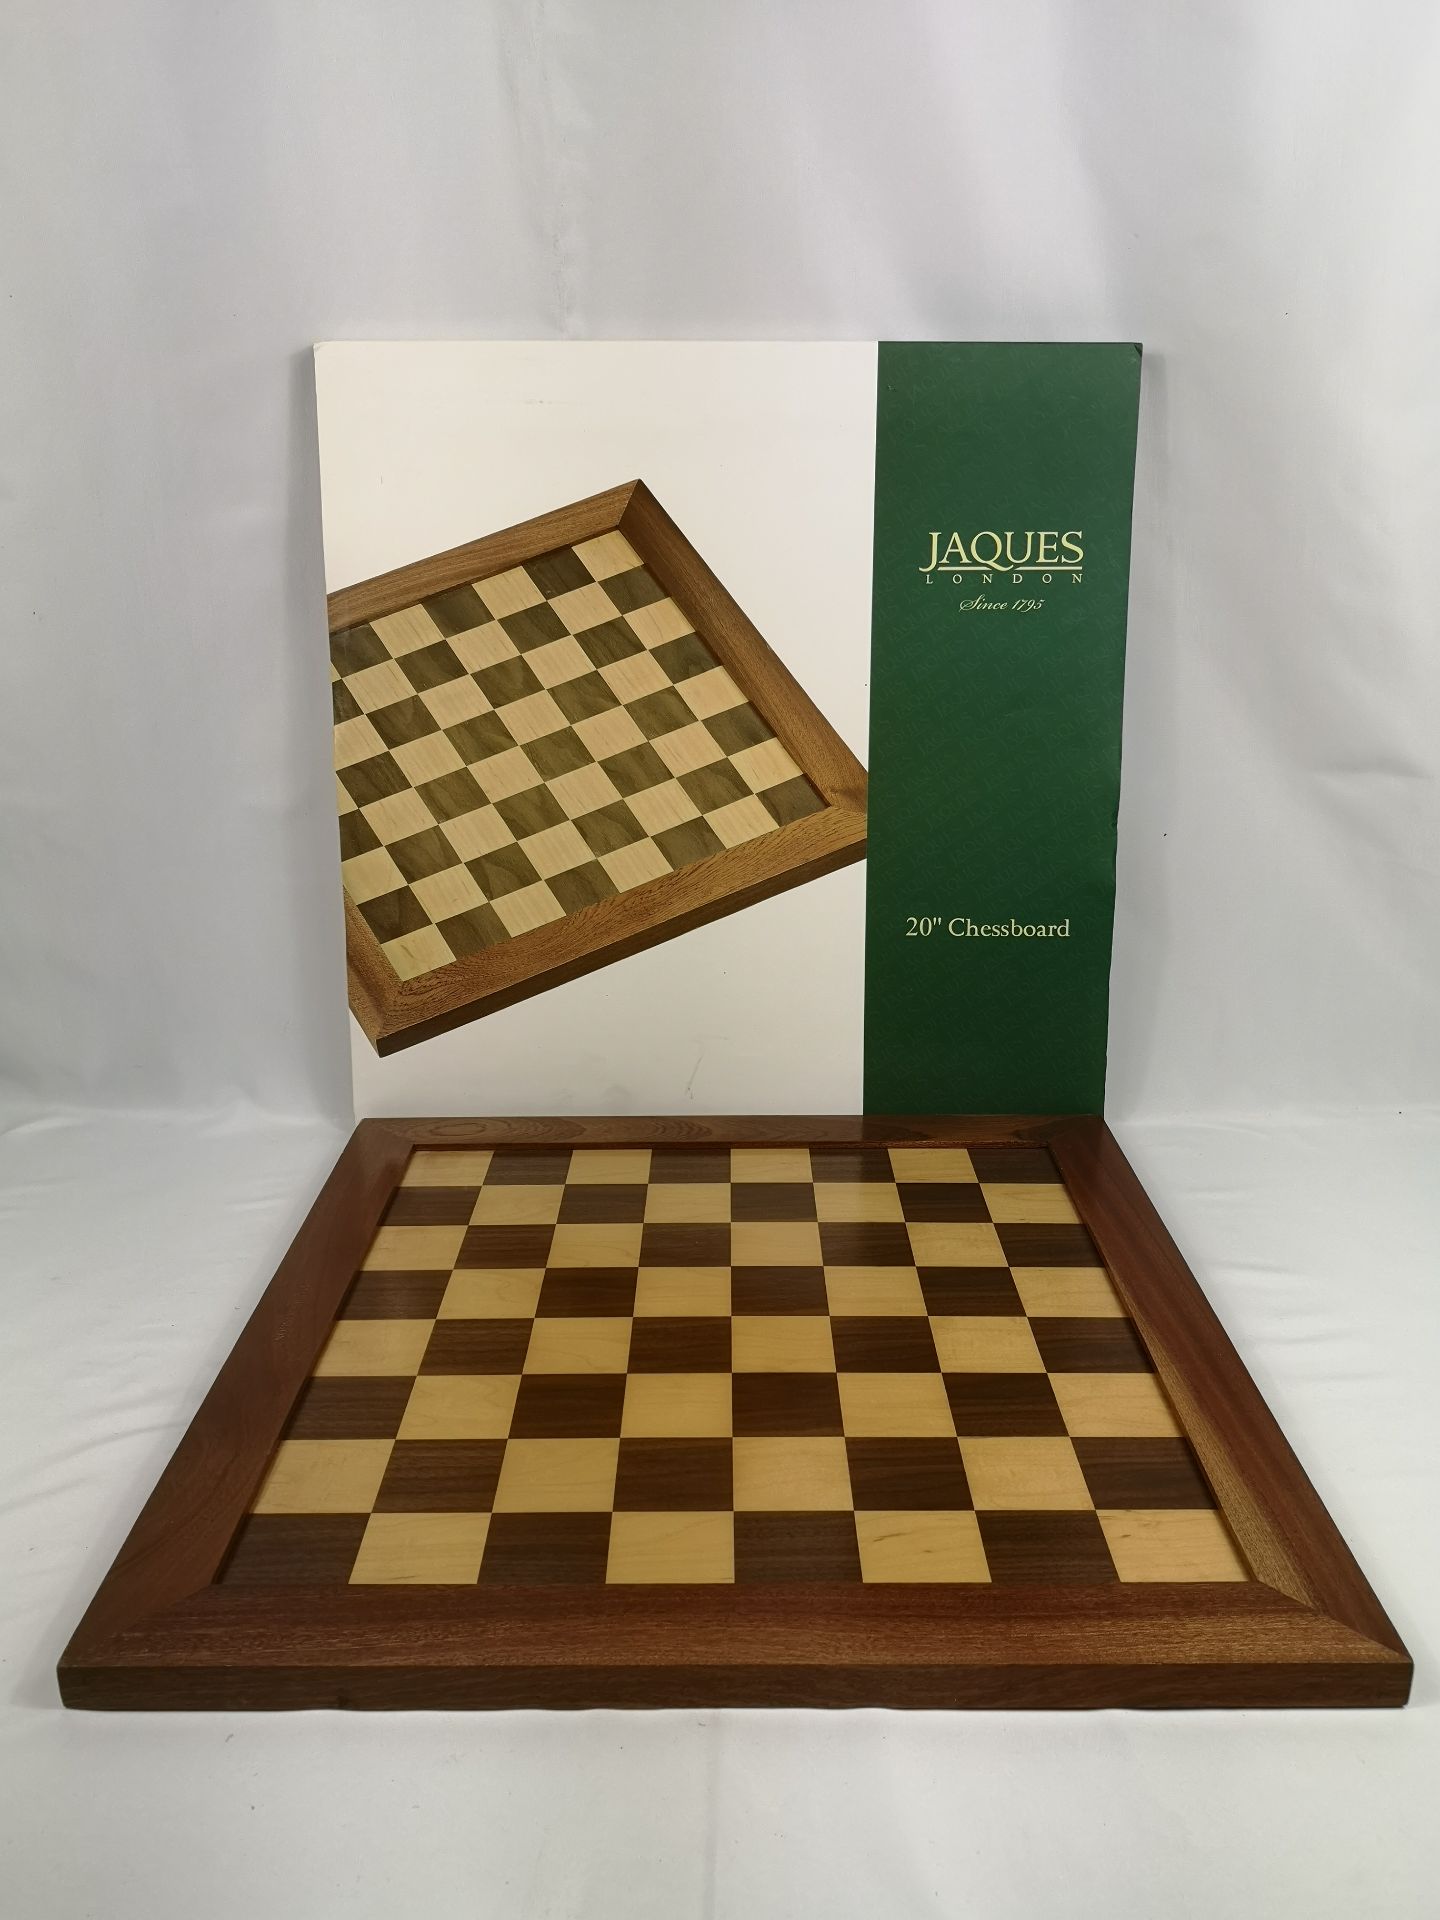 Jaques chess board